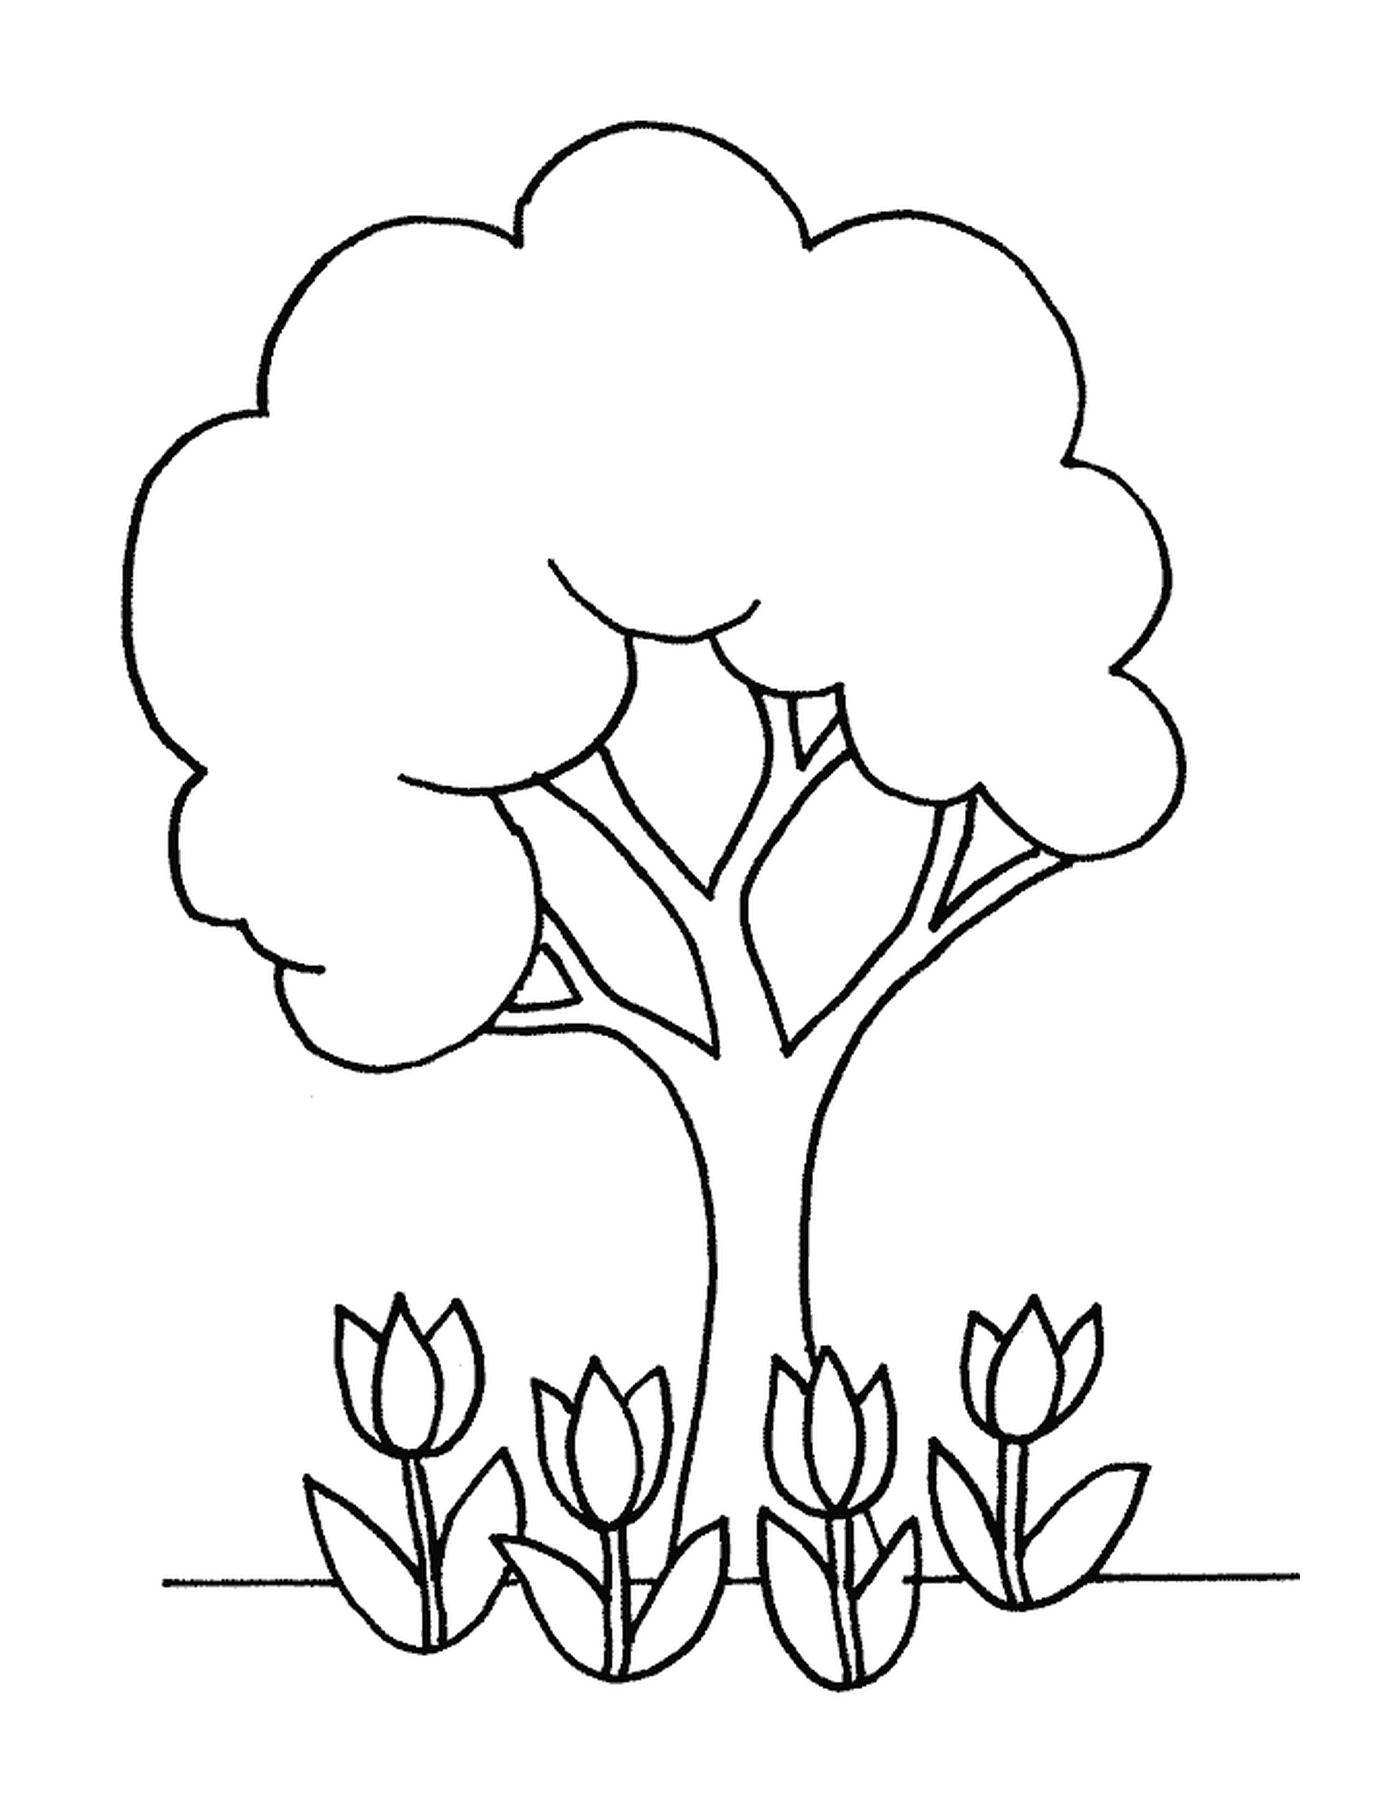  A tree and tulips 